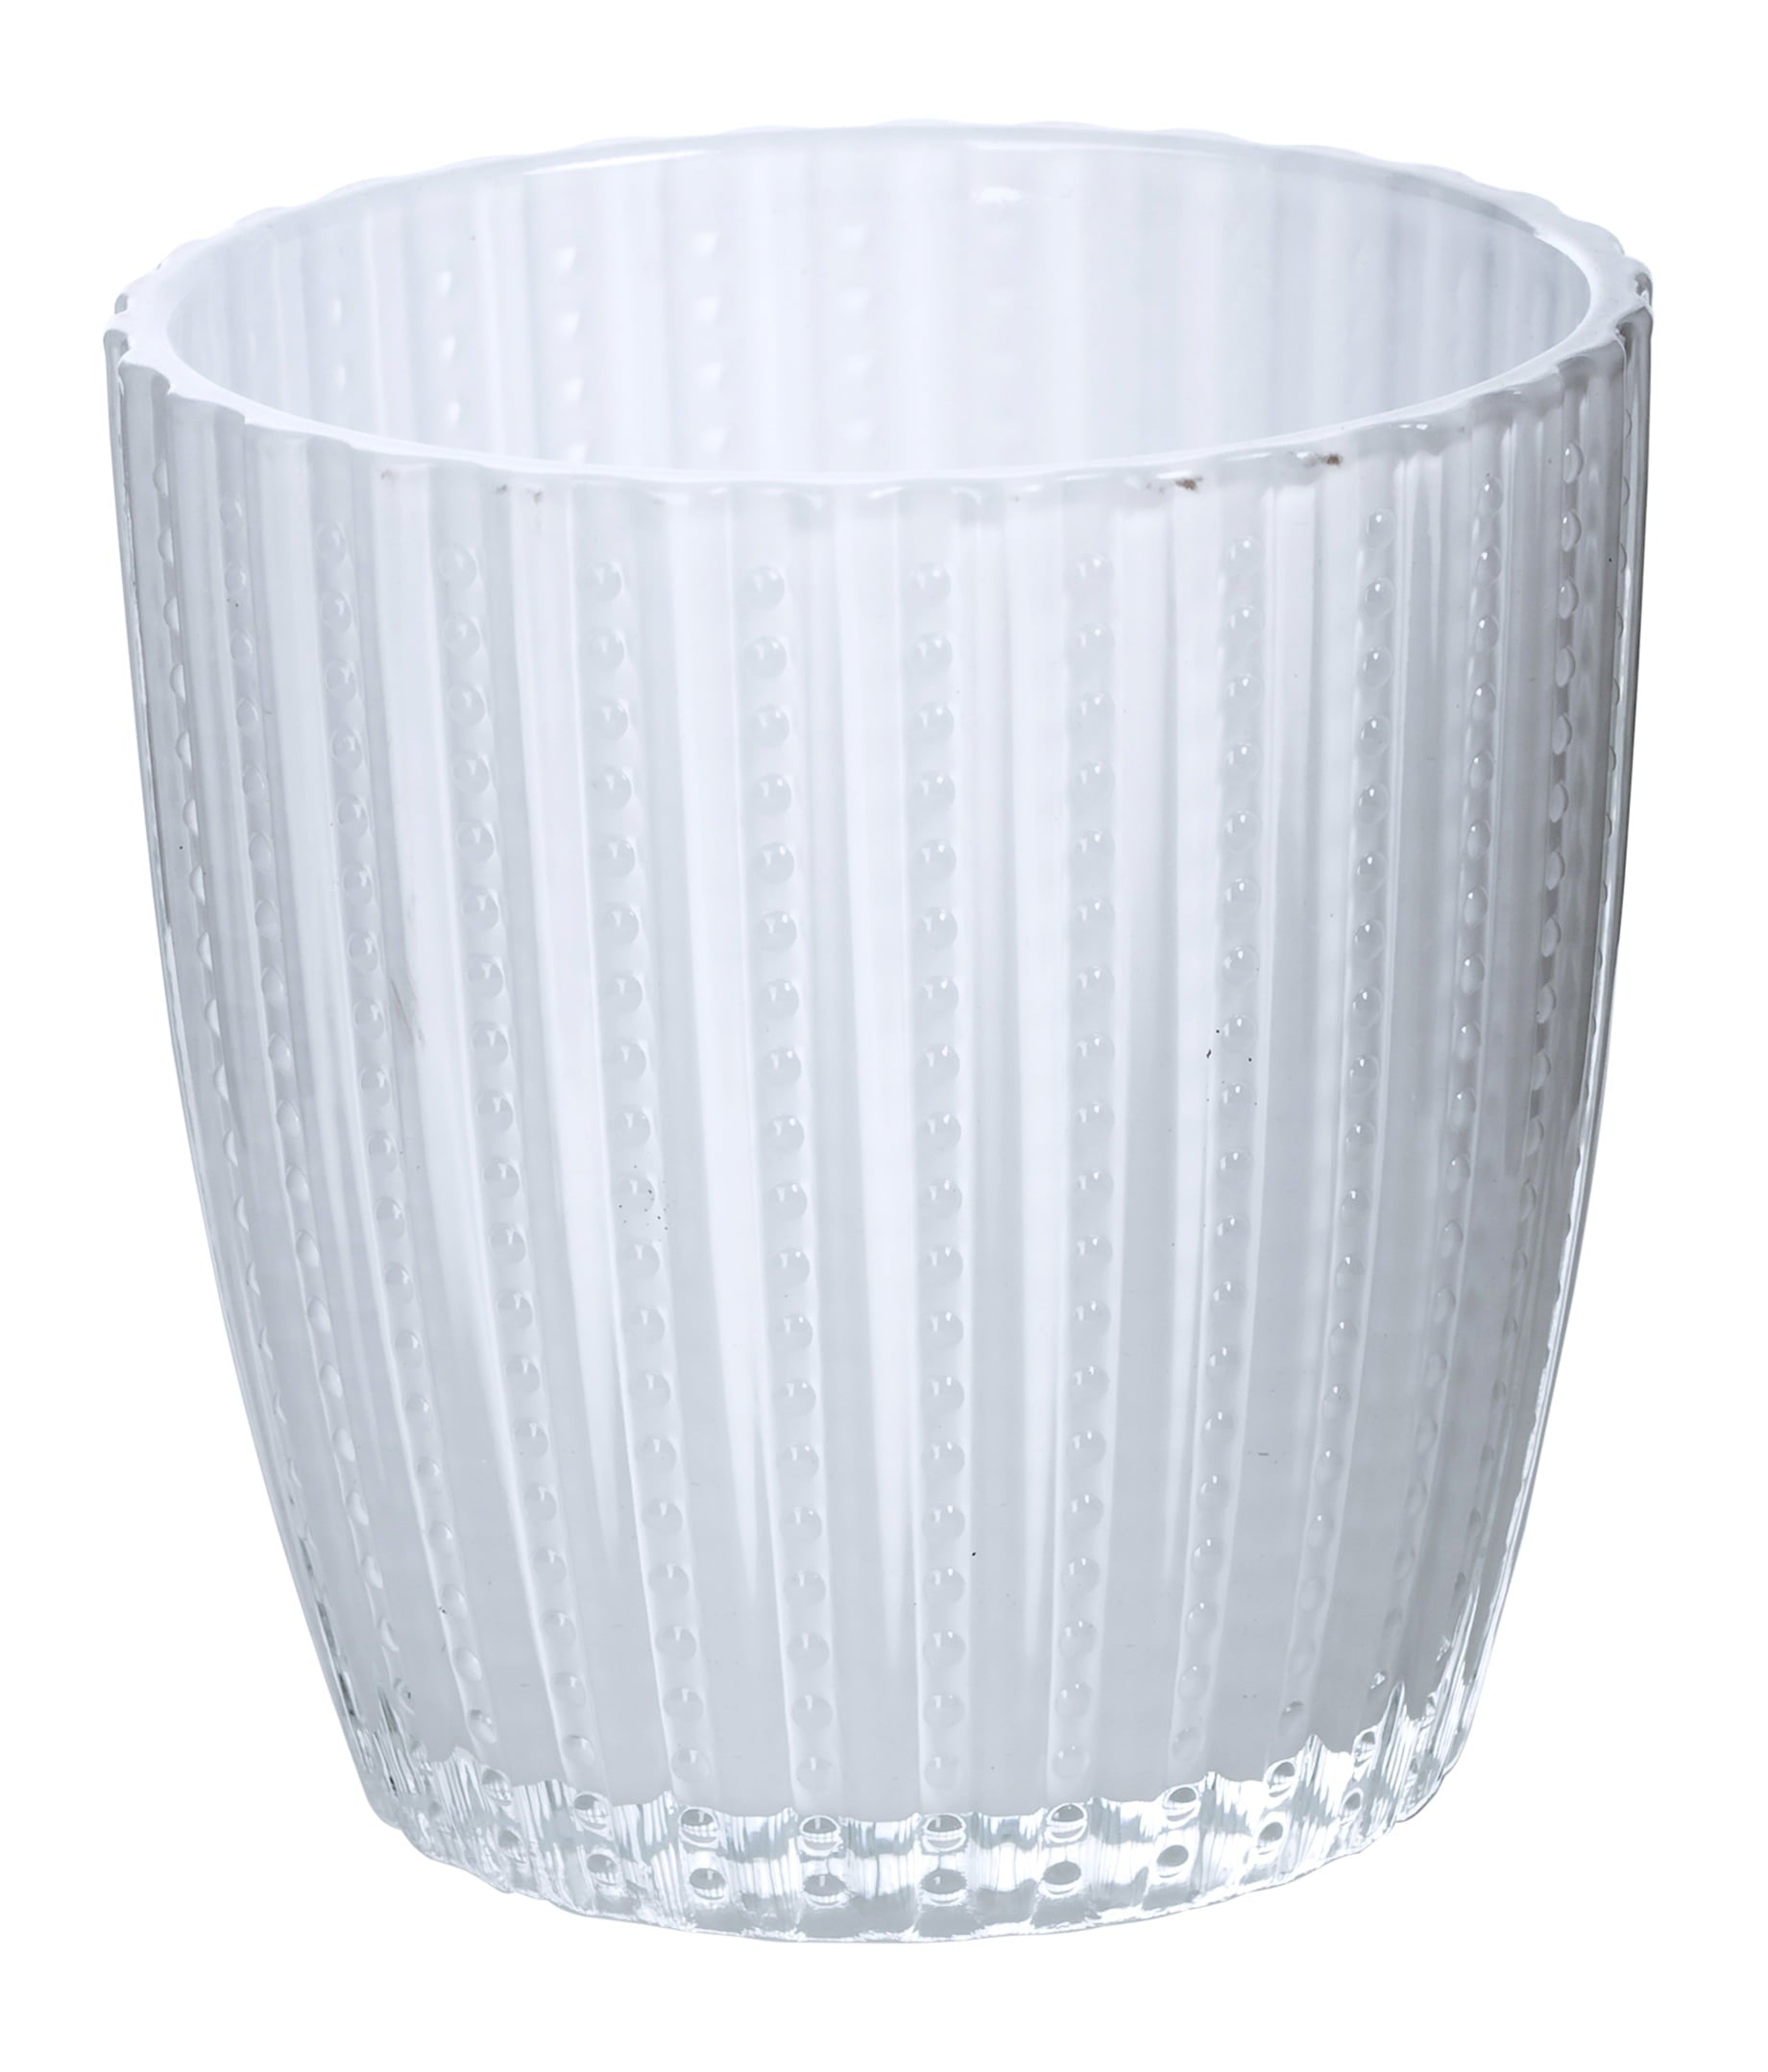 Mainstays White Stripe Glass Votive and Tealight Candle Holder